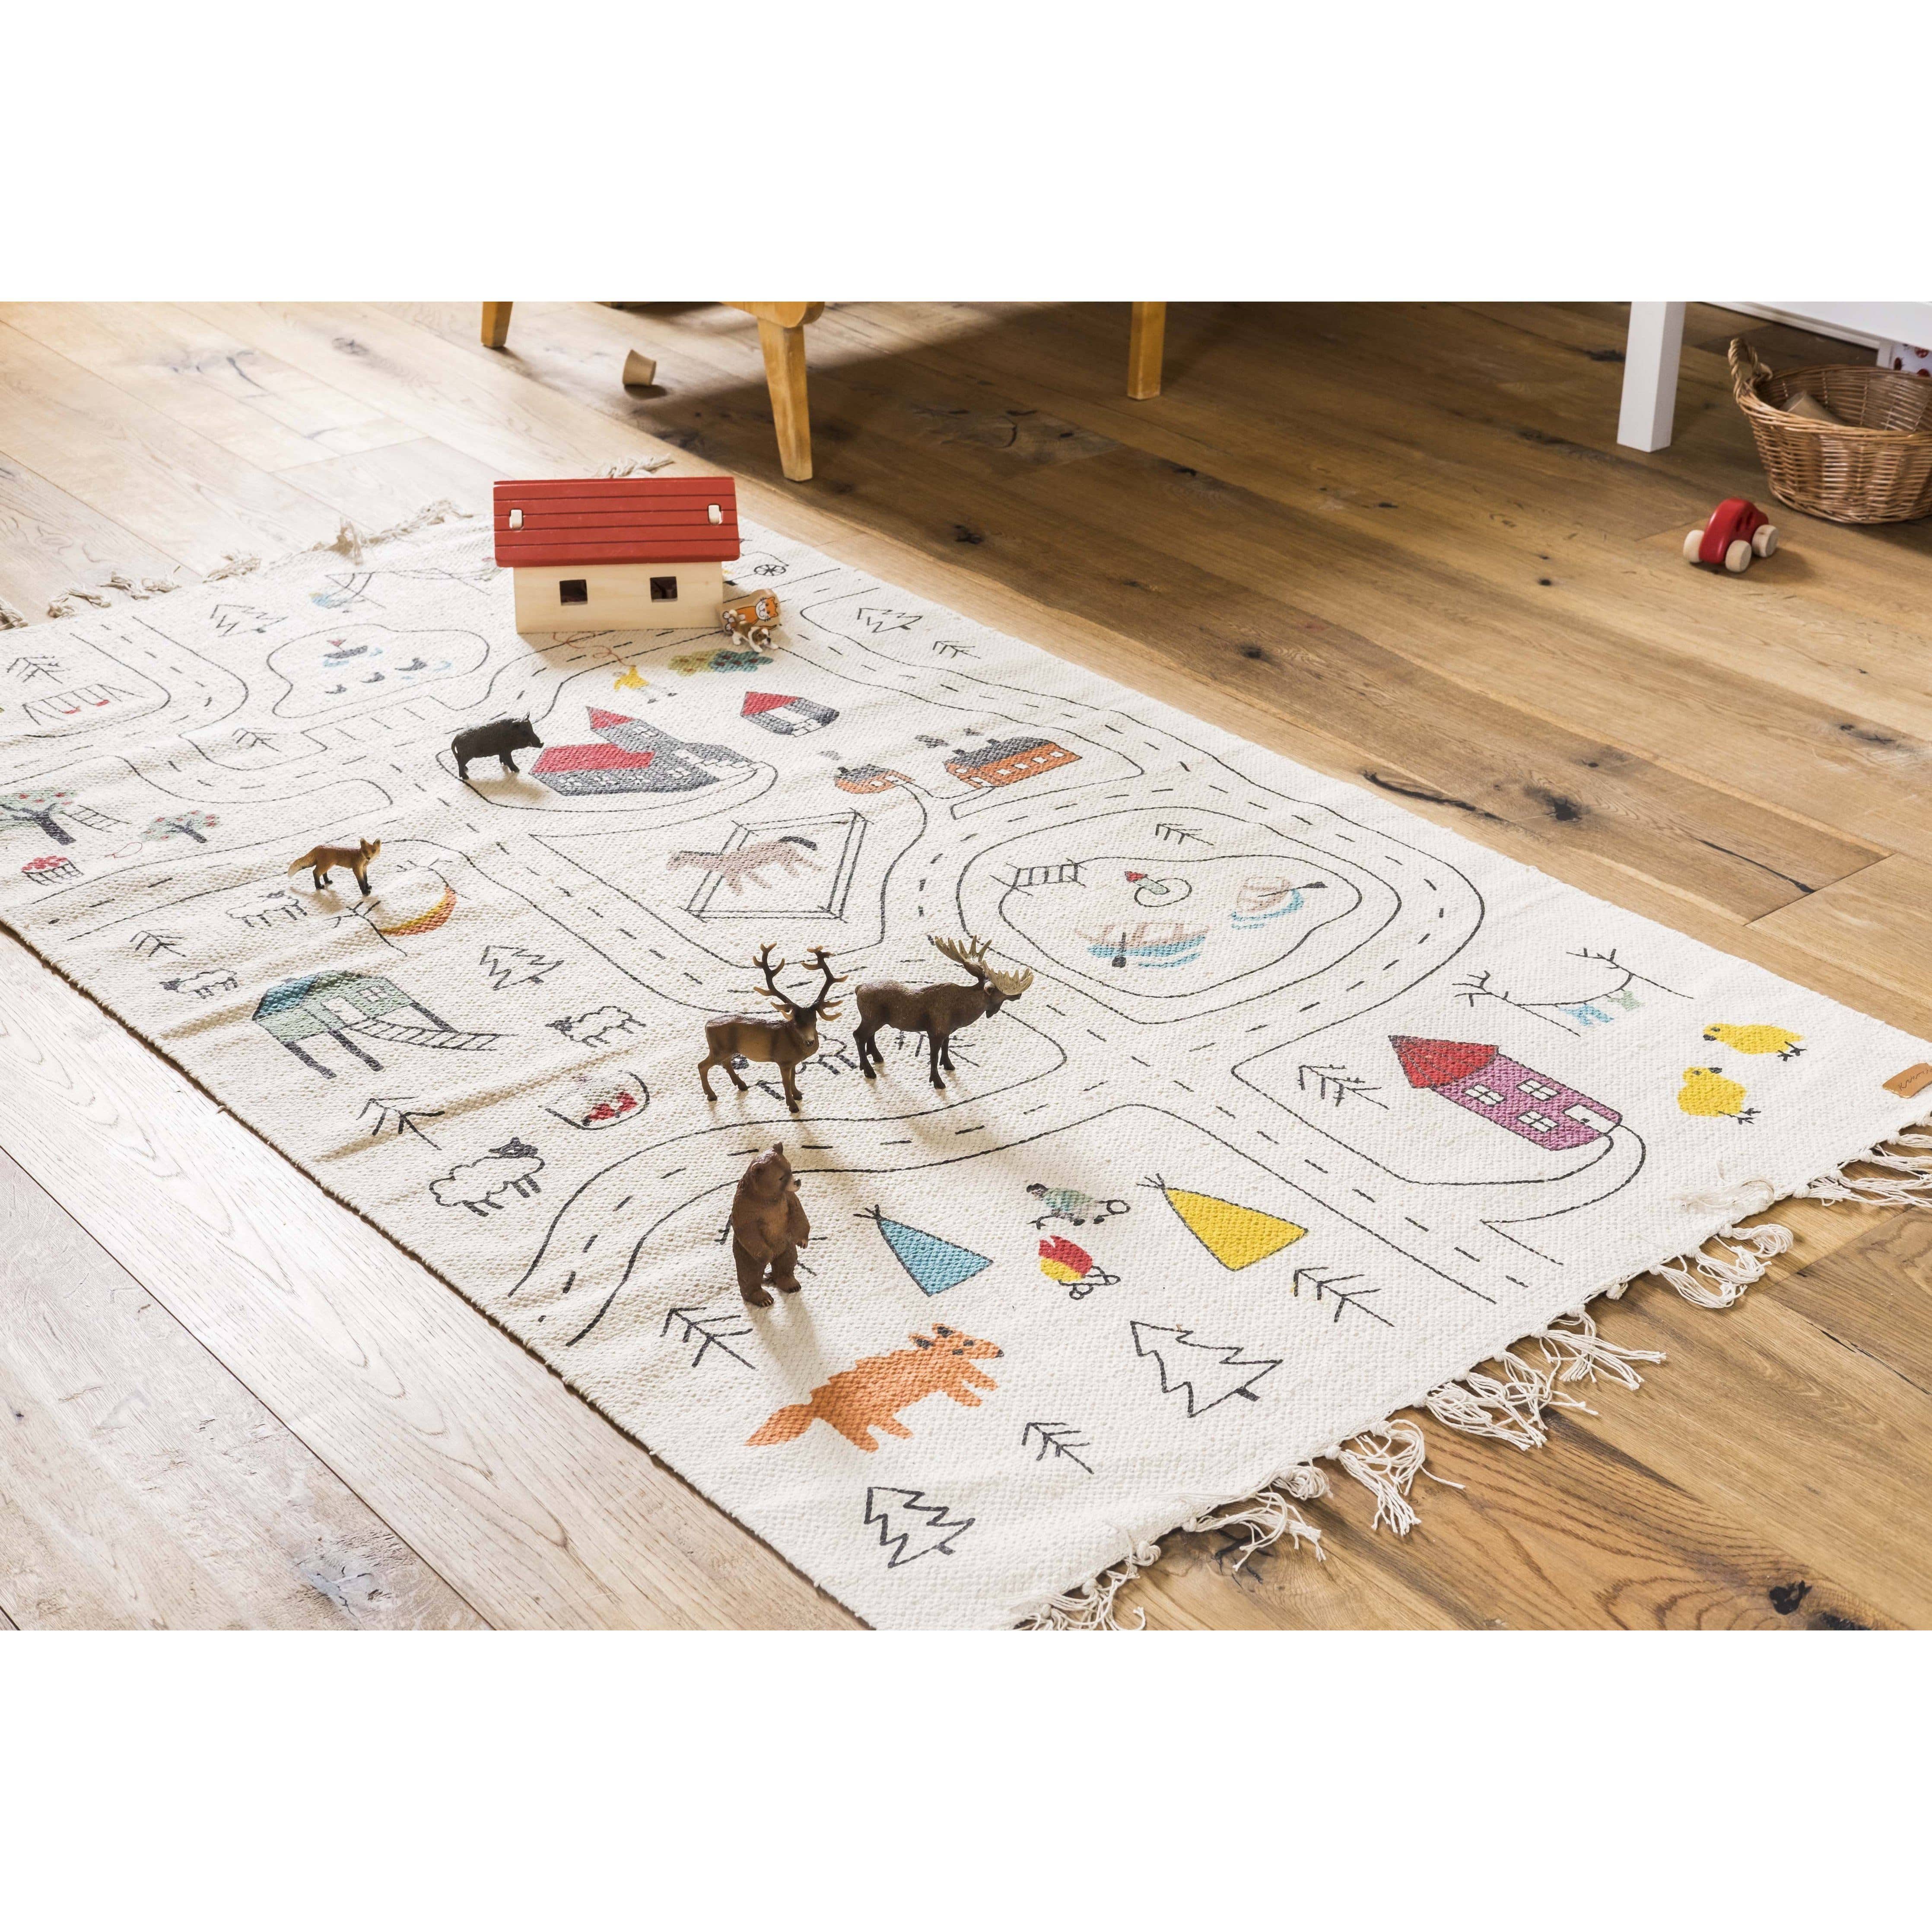 TUKLUK: high-quality play-mats for kids ➜ discover now